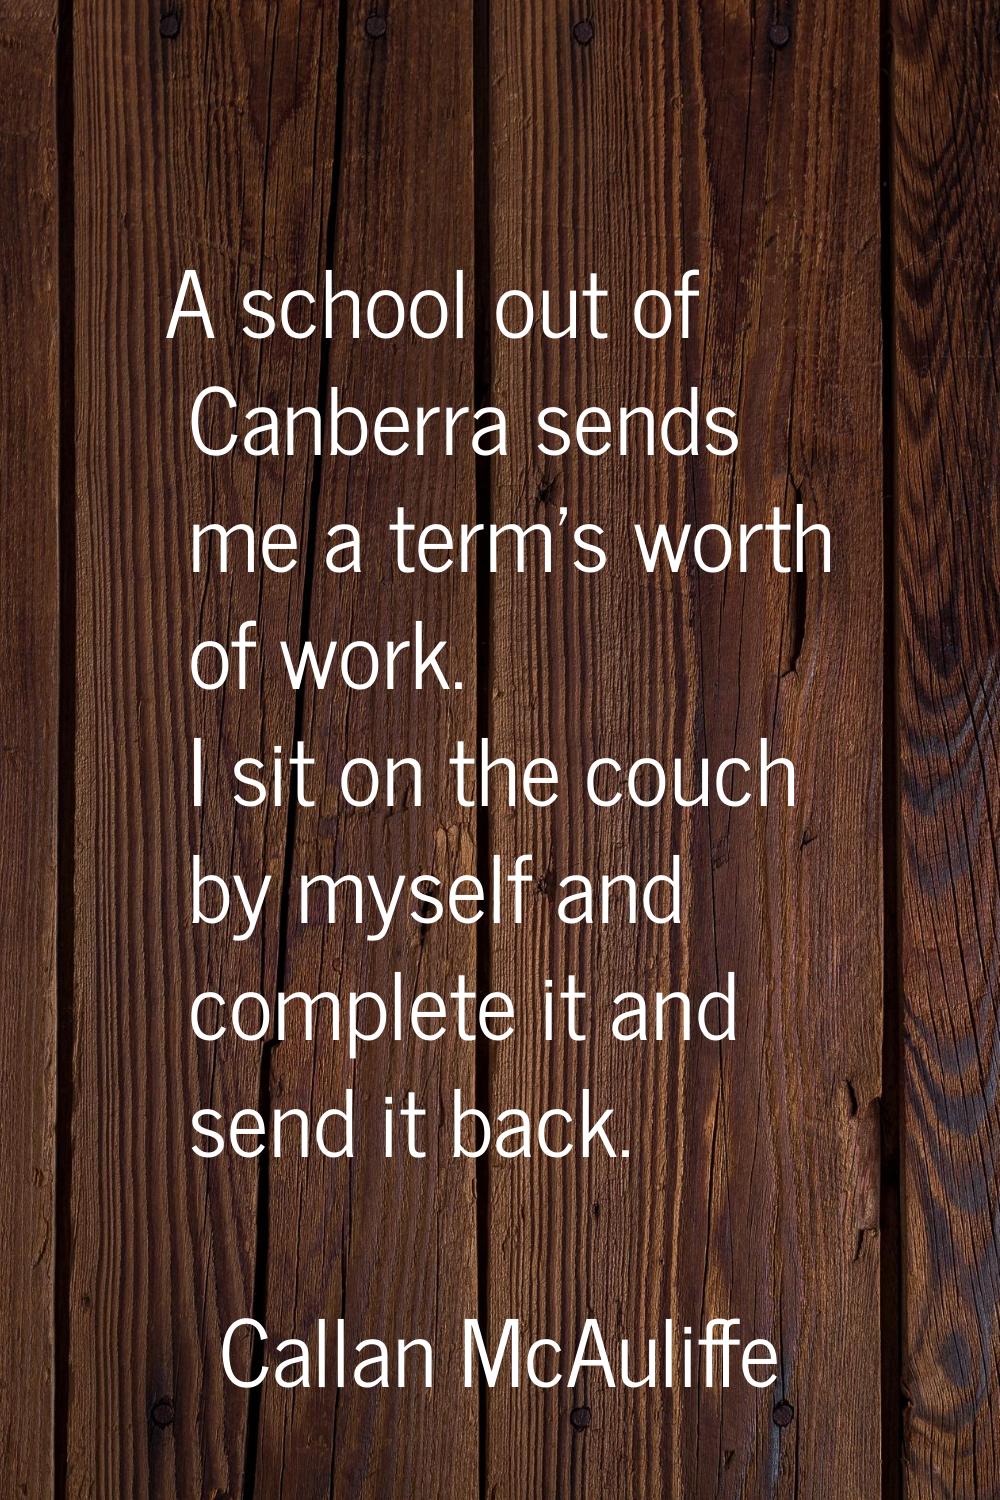 A school out of Canberra sends me a term's worth of work. I sit on the couch by myself and complete